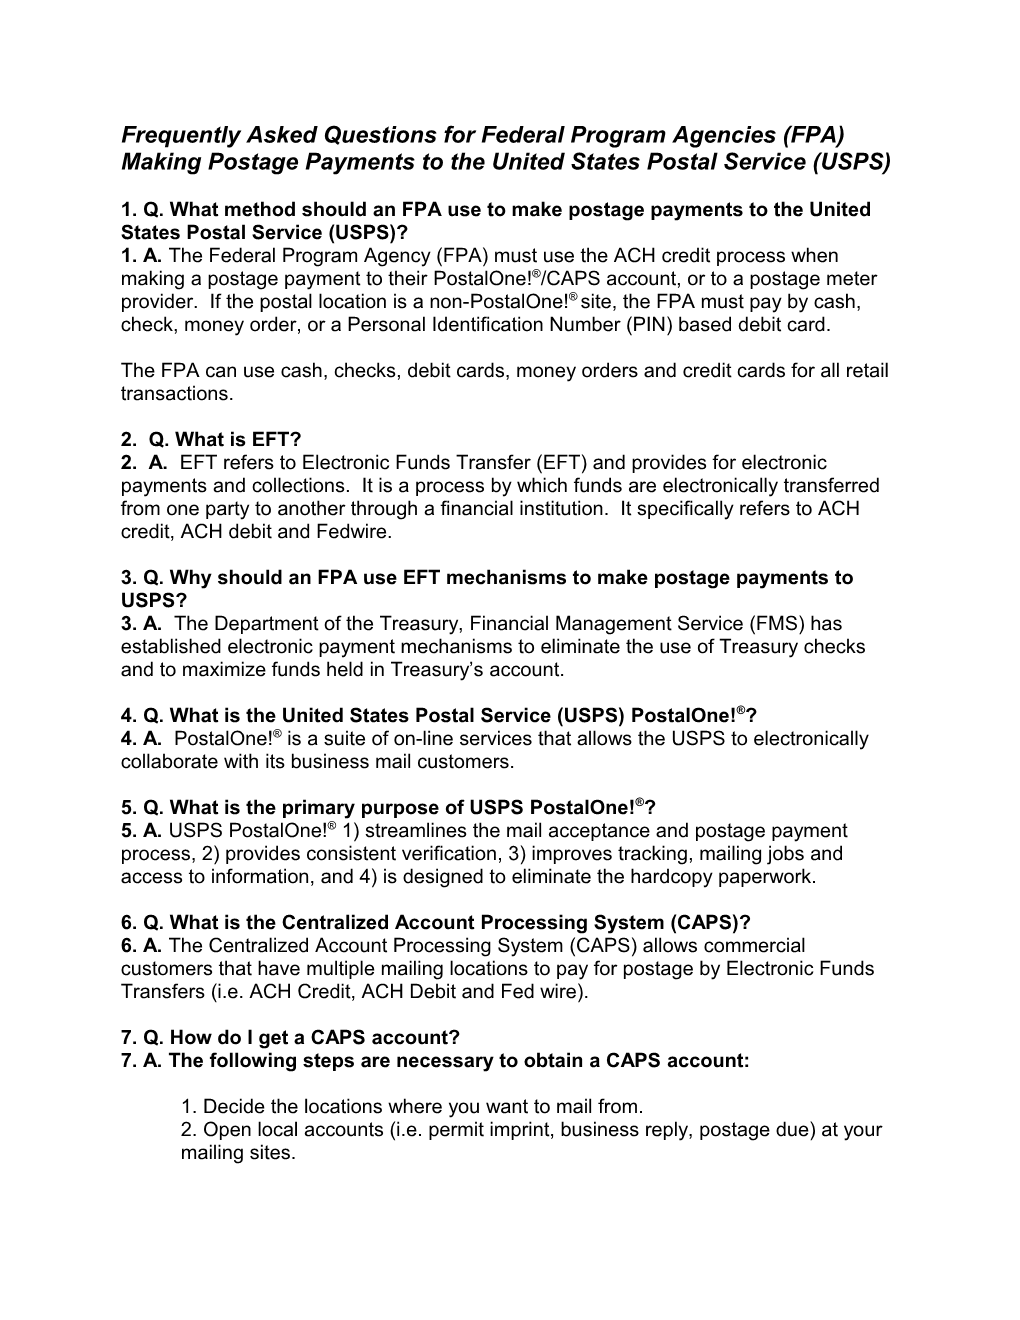 Frequently Asked Questions Forfederal Program Agencies (FPA)Making Postage Paymentsto